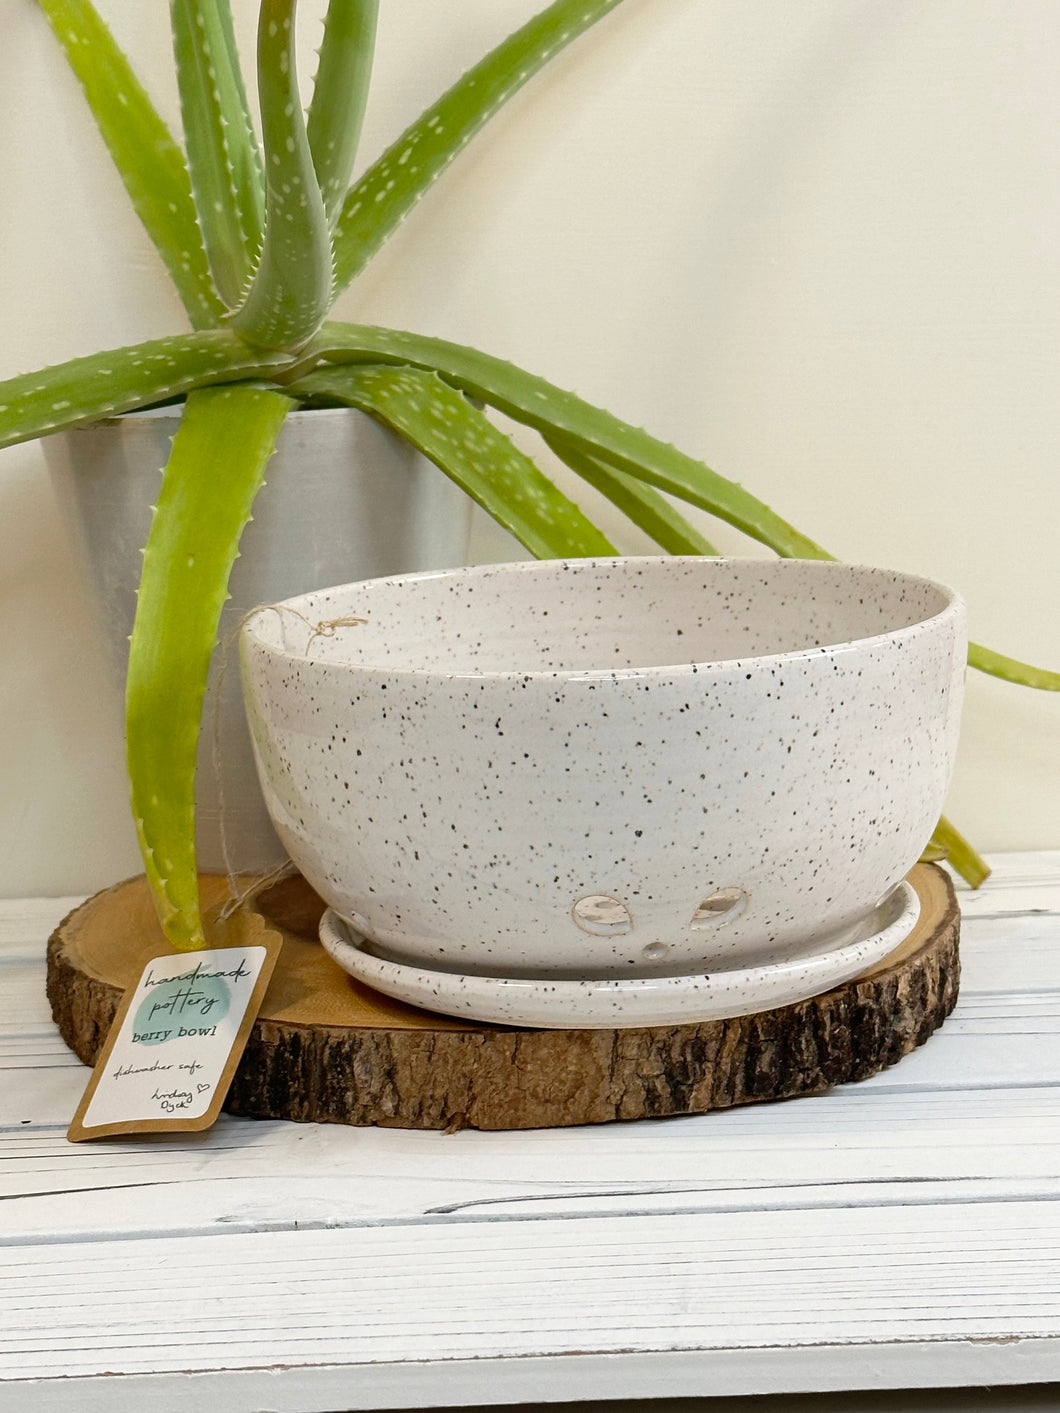 #030 - white speckled berry bowl with dish